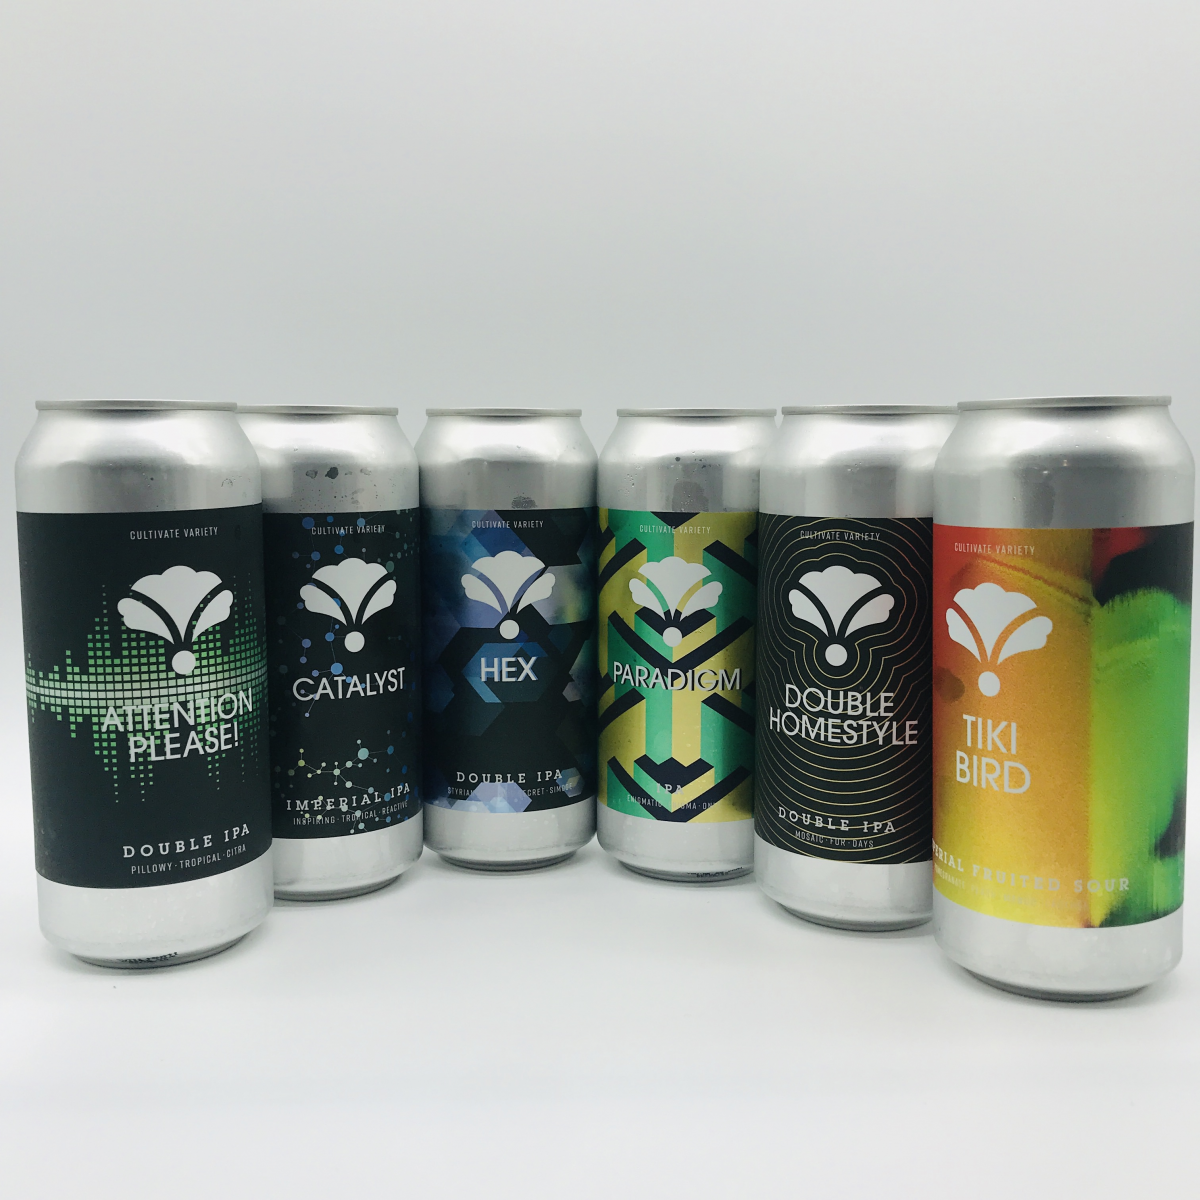 Fresh Bearded Iris 6 Pack Including Attention Please Catalyst Hex Paradigm Double Homestyle Tiki Bird Mybeercollectibles